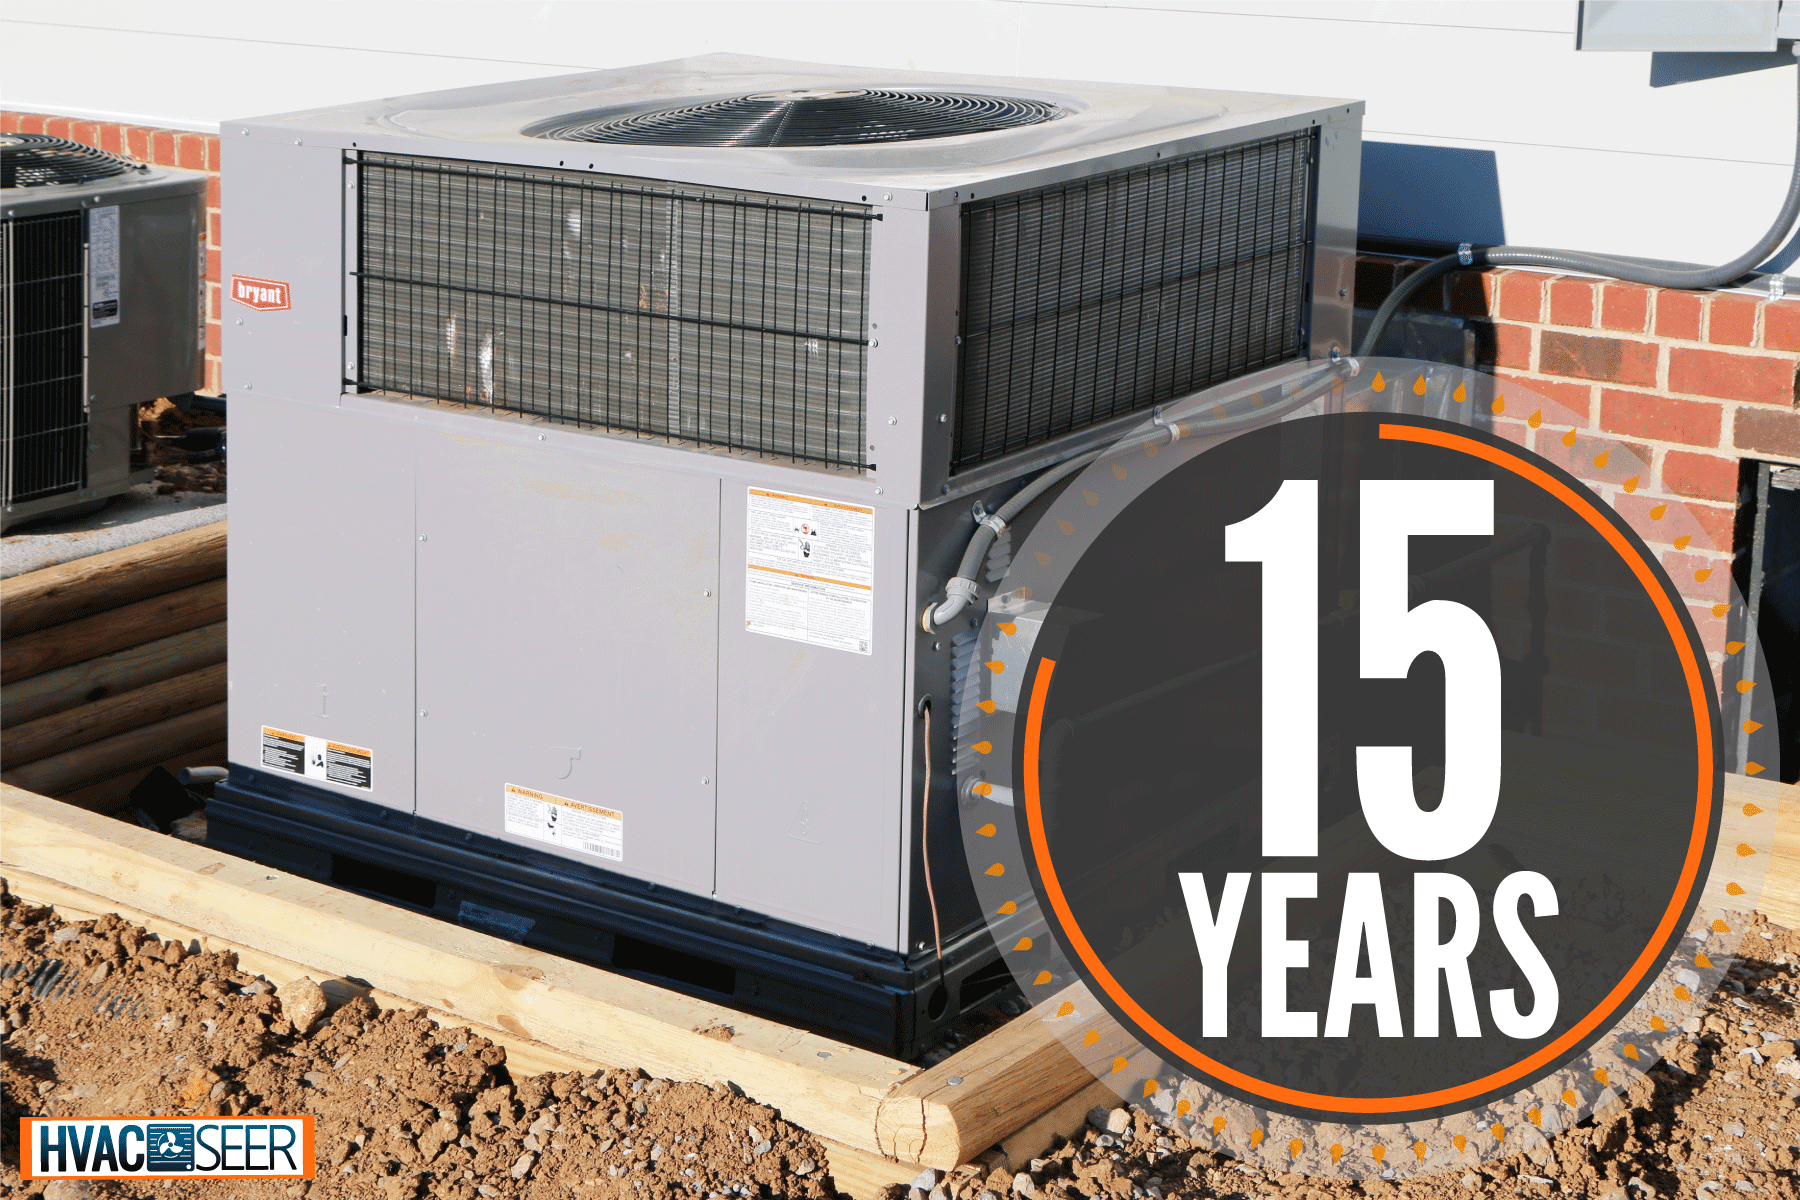 A Bryant air conditioning unit mounted on a concrete block, How Long Does A Bryant Air Conditioner Last?